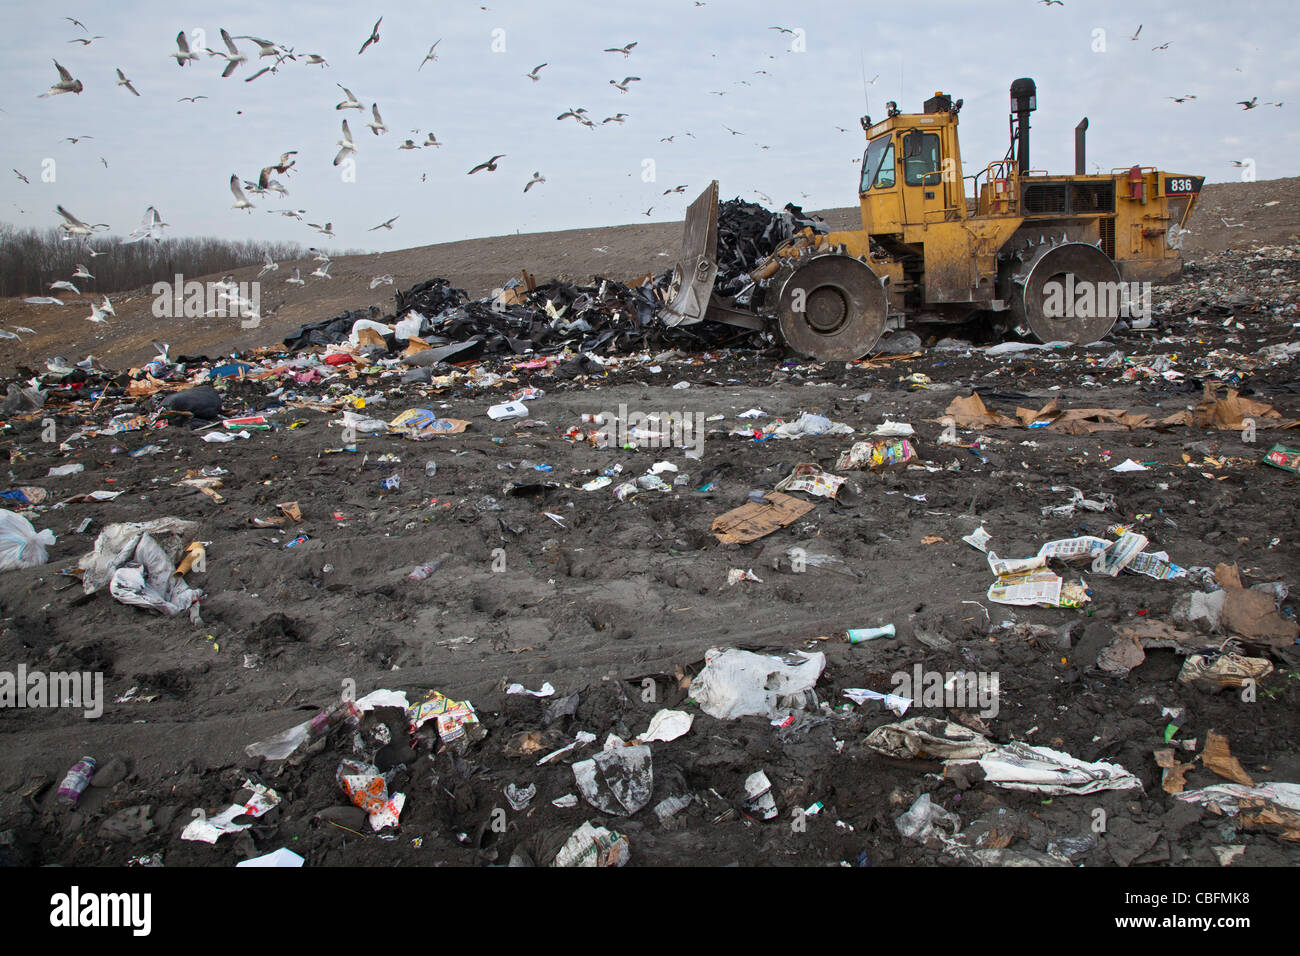 Smith's Creek, Michigan - A bulldozer levels and compacts garbage at St. Clair County's Smith's Creek Landfill. Stock Photo